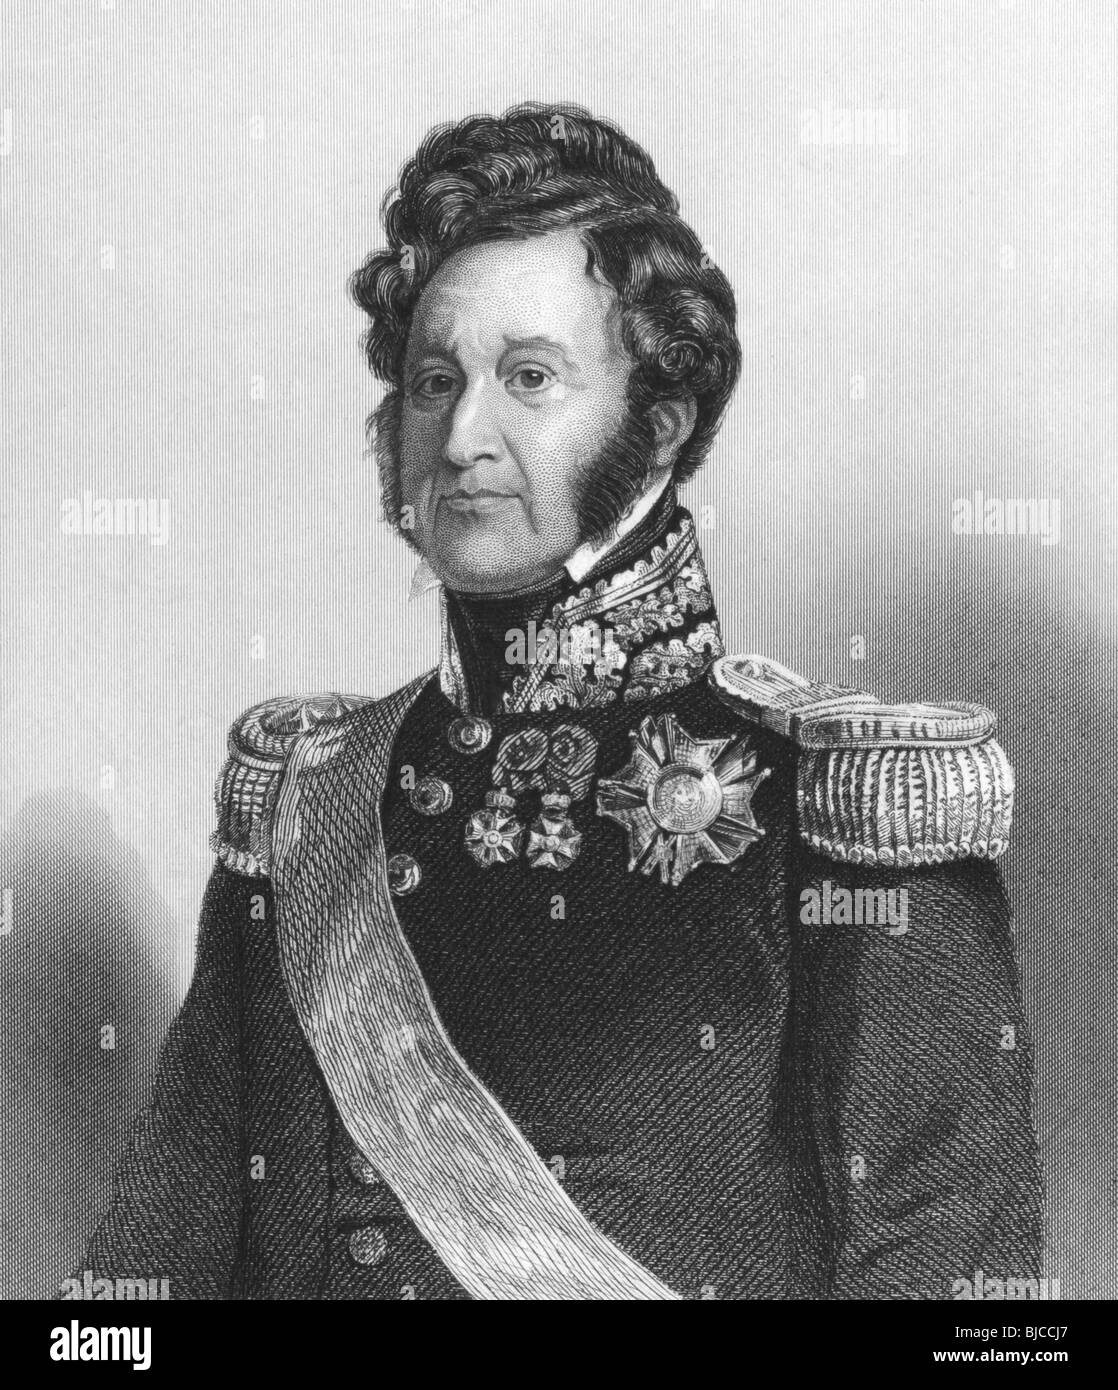 Louis Philippe (1773-1850) on engraving from the 1800s. King of the French during 1830-1848. Engraved by H.Meyer. Stock Photo